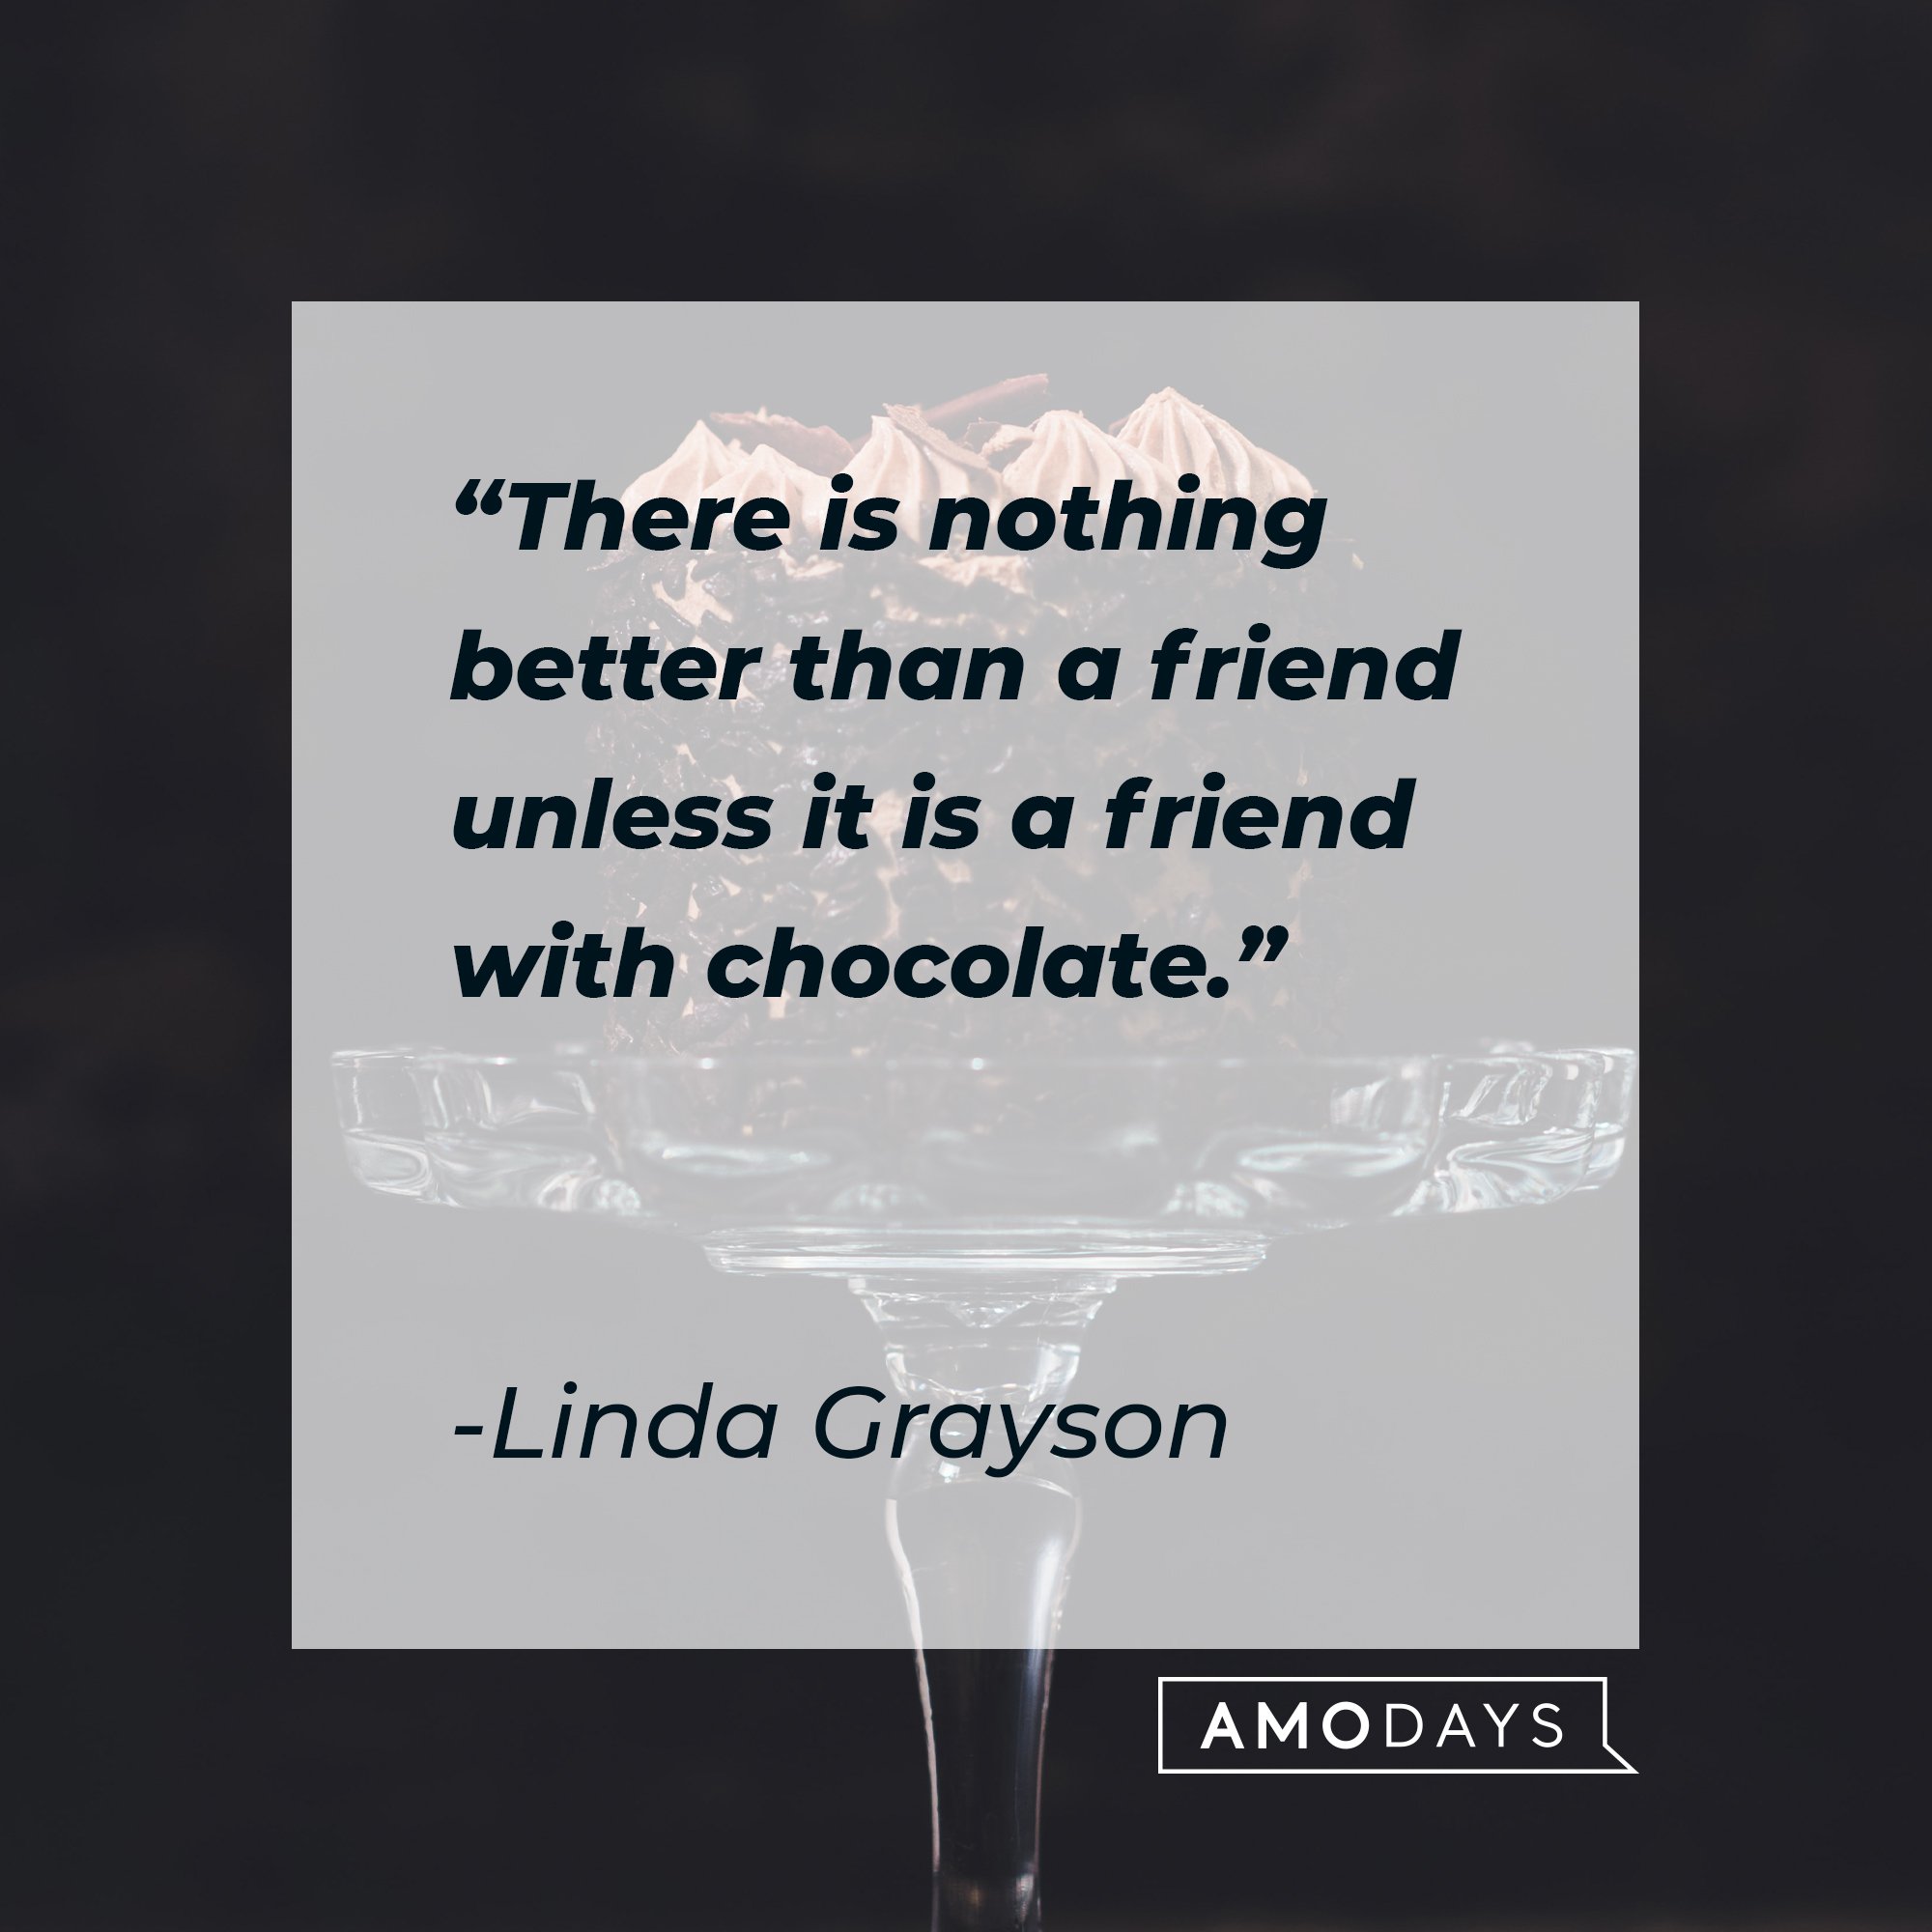 Linda Grayson’“There is nothing better than a friend unless it is a friend with chocolate.” | Image: AmoDays